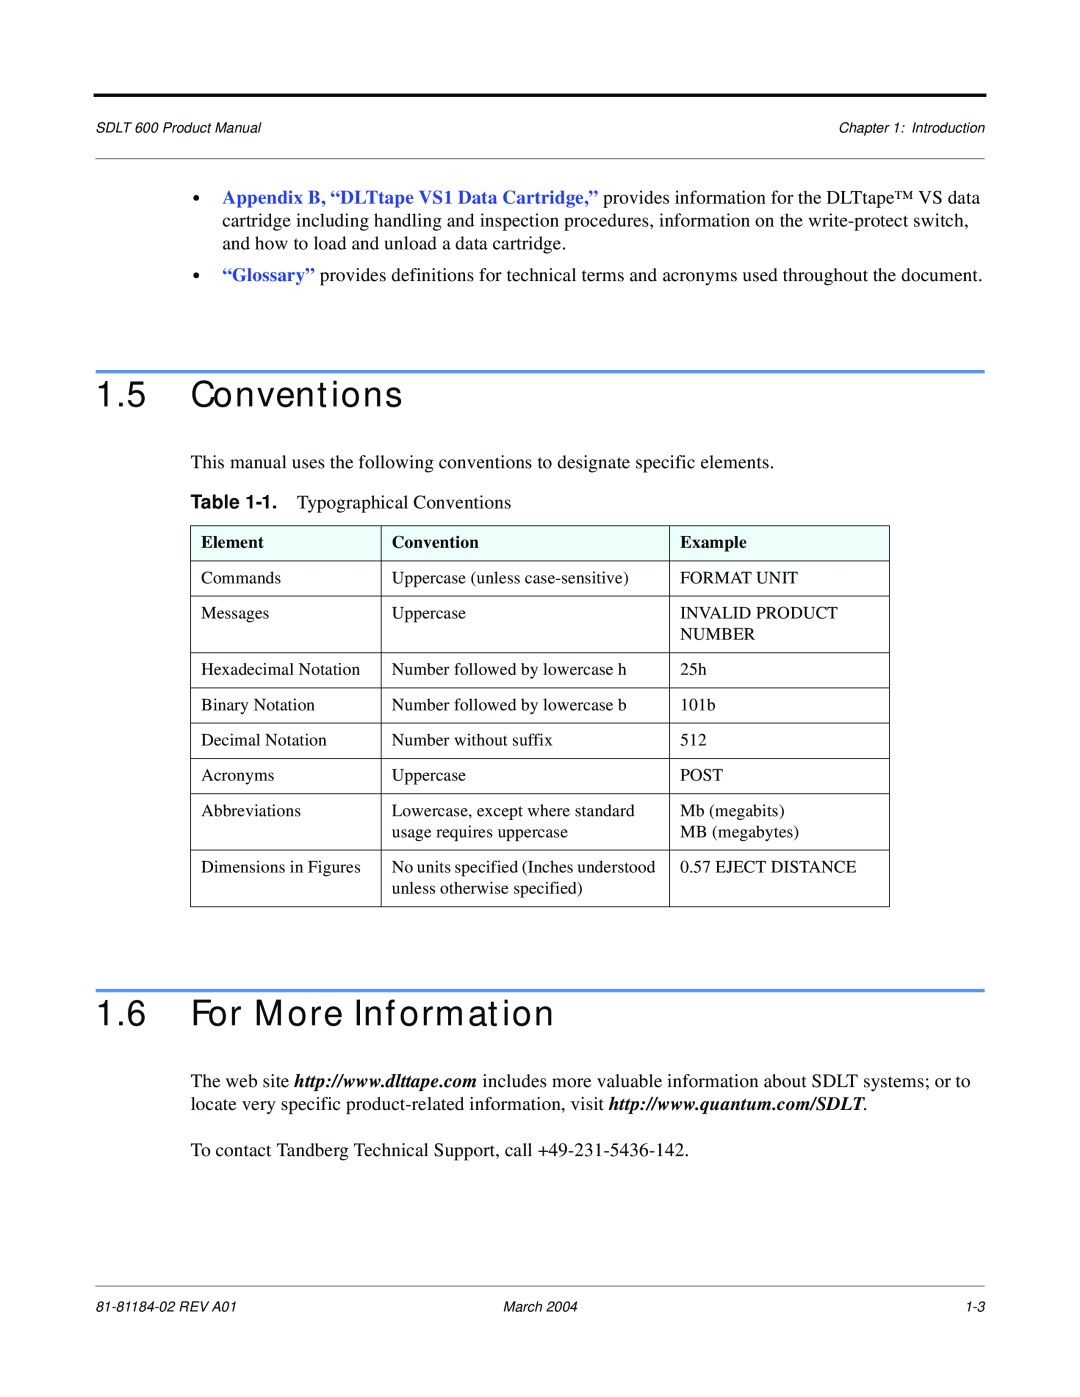 Tandberg Data 600 manual Conventions, For More Information, Element, Example 